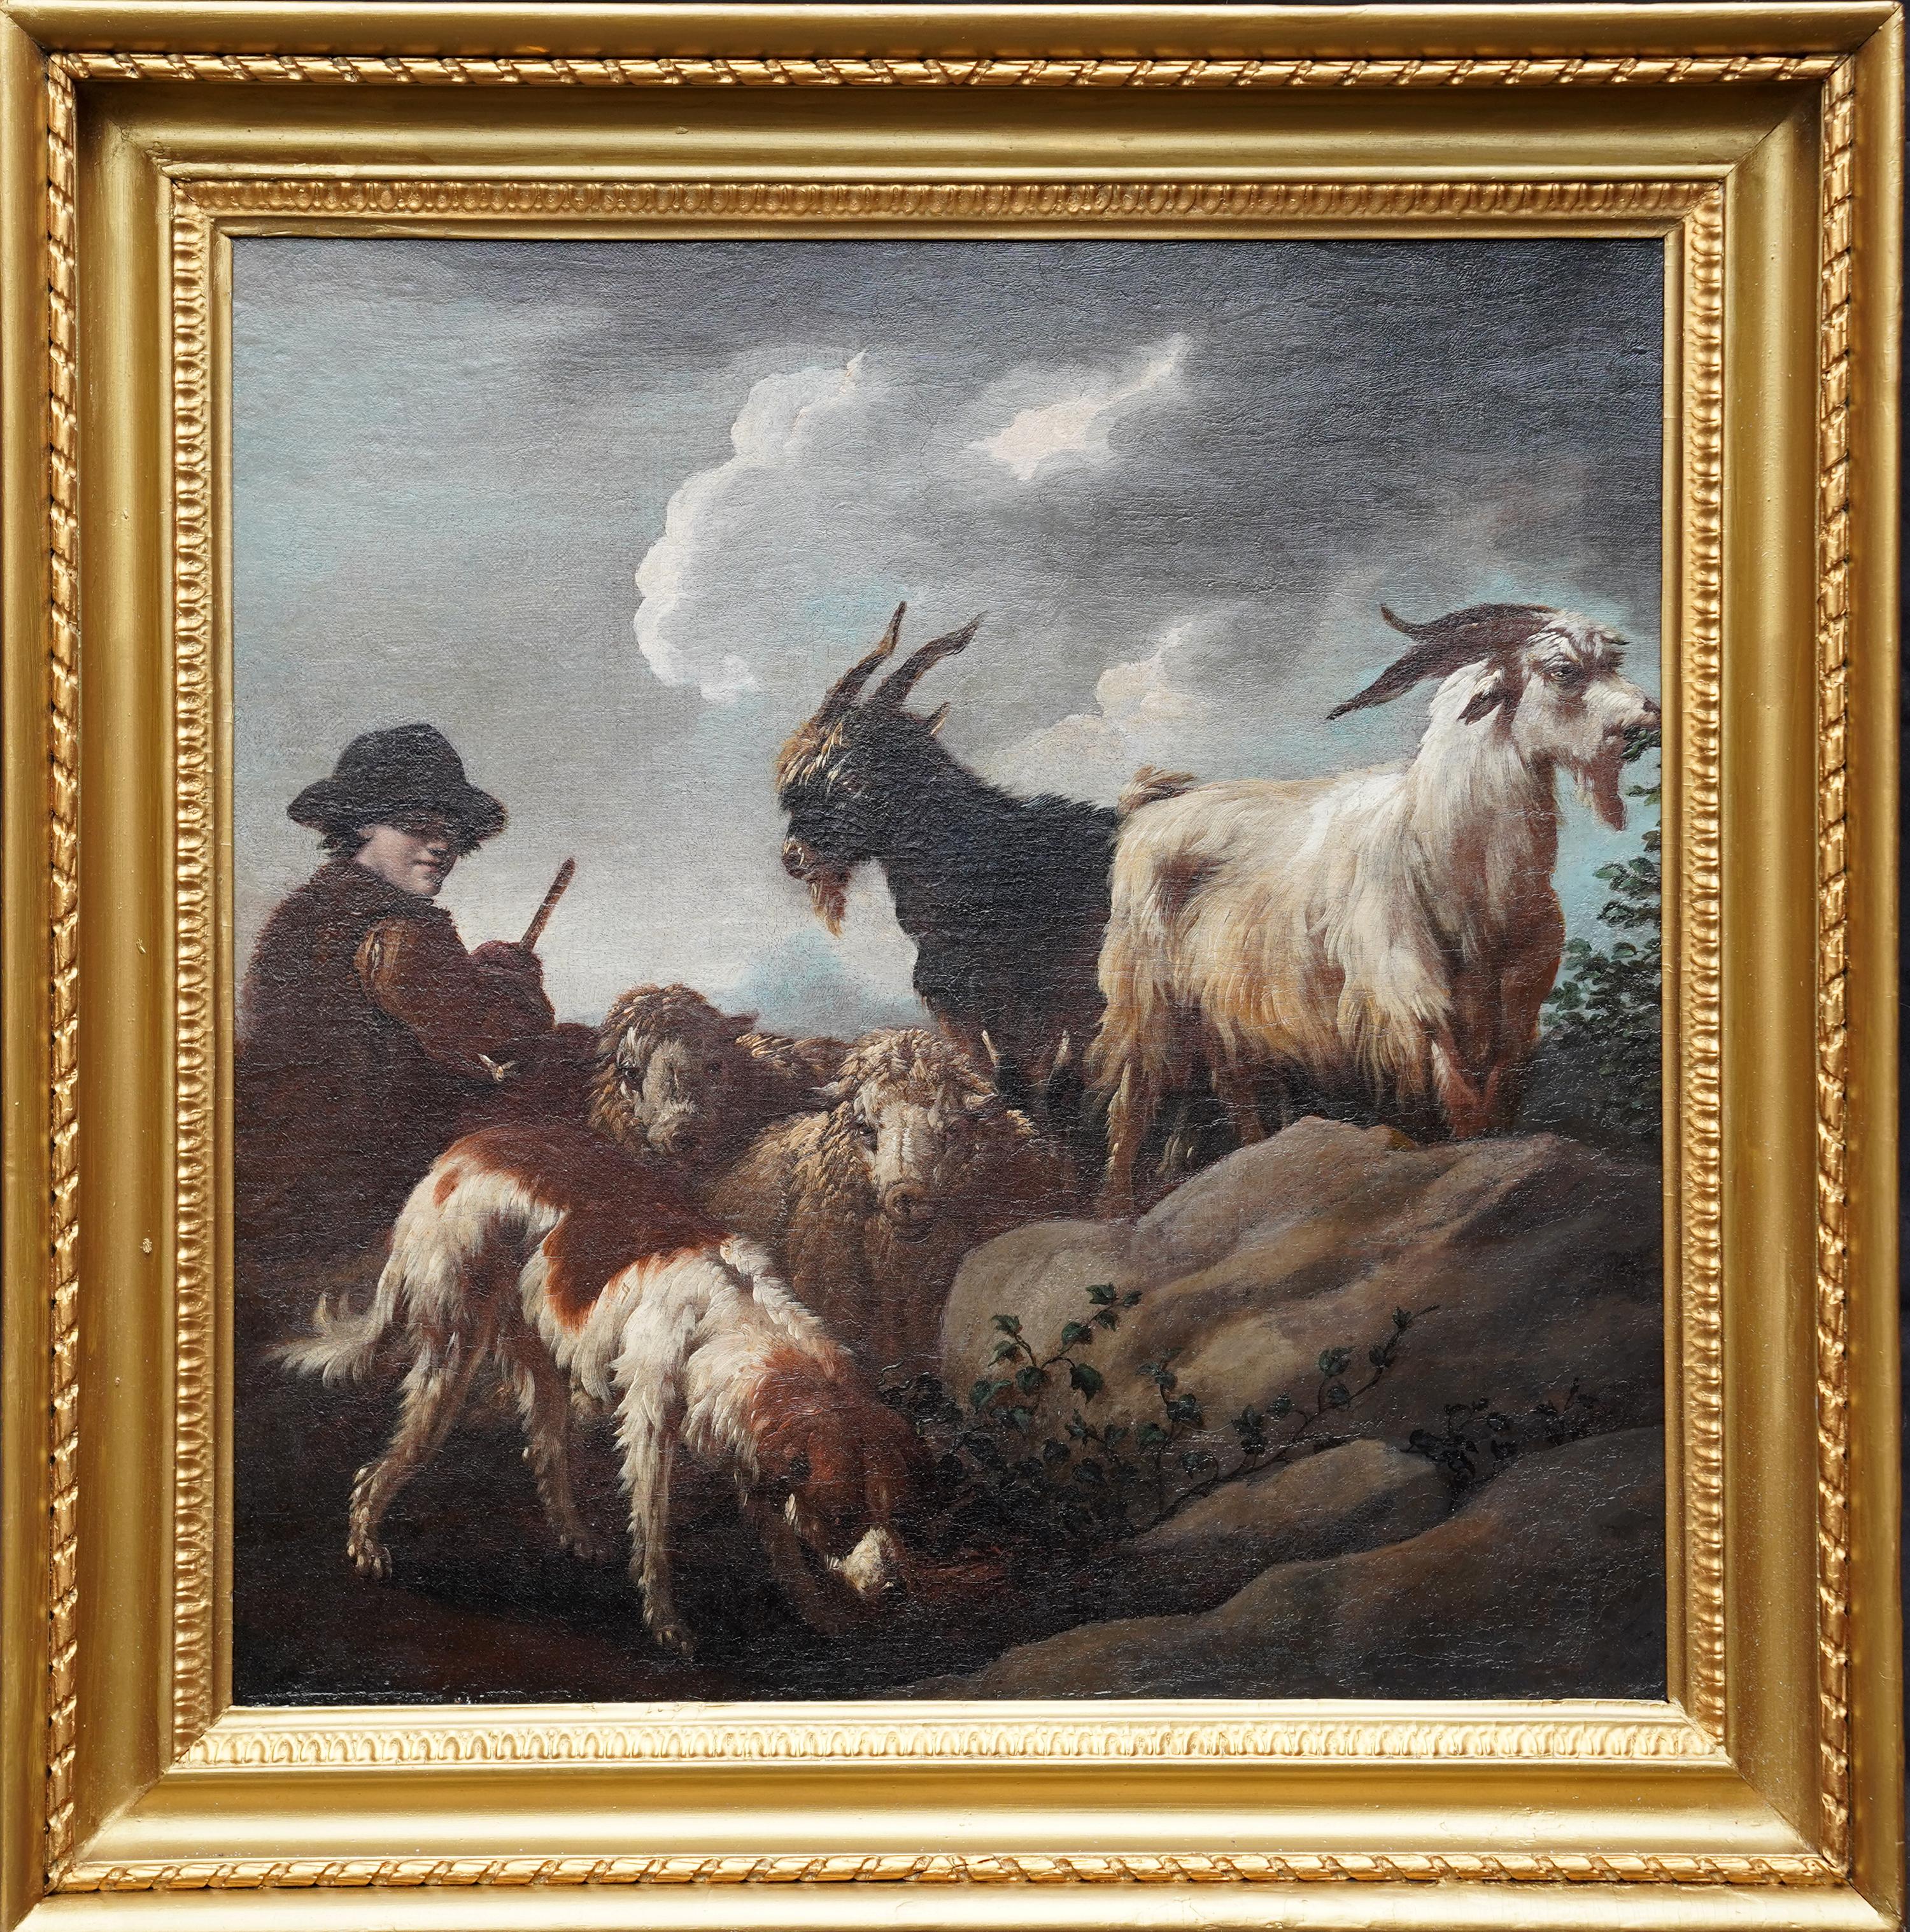 Pastoral Scene with Shepherd and Animals - Old Master c 1700 art oil painting